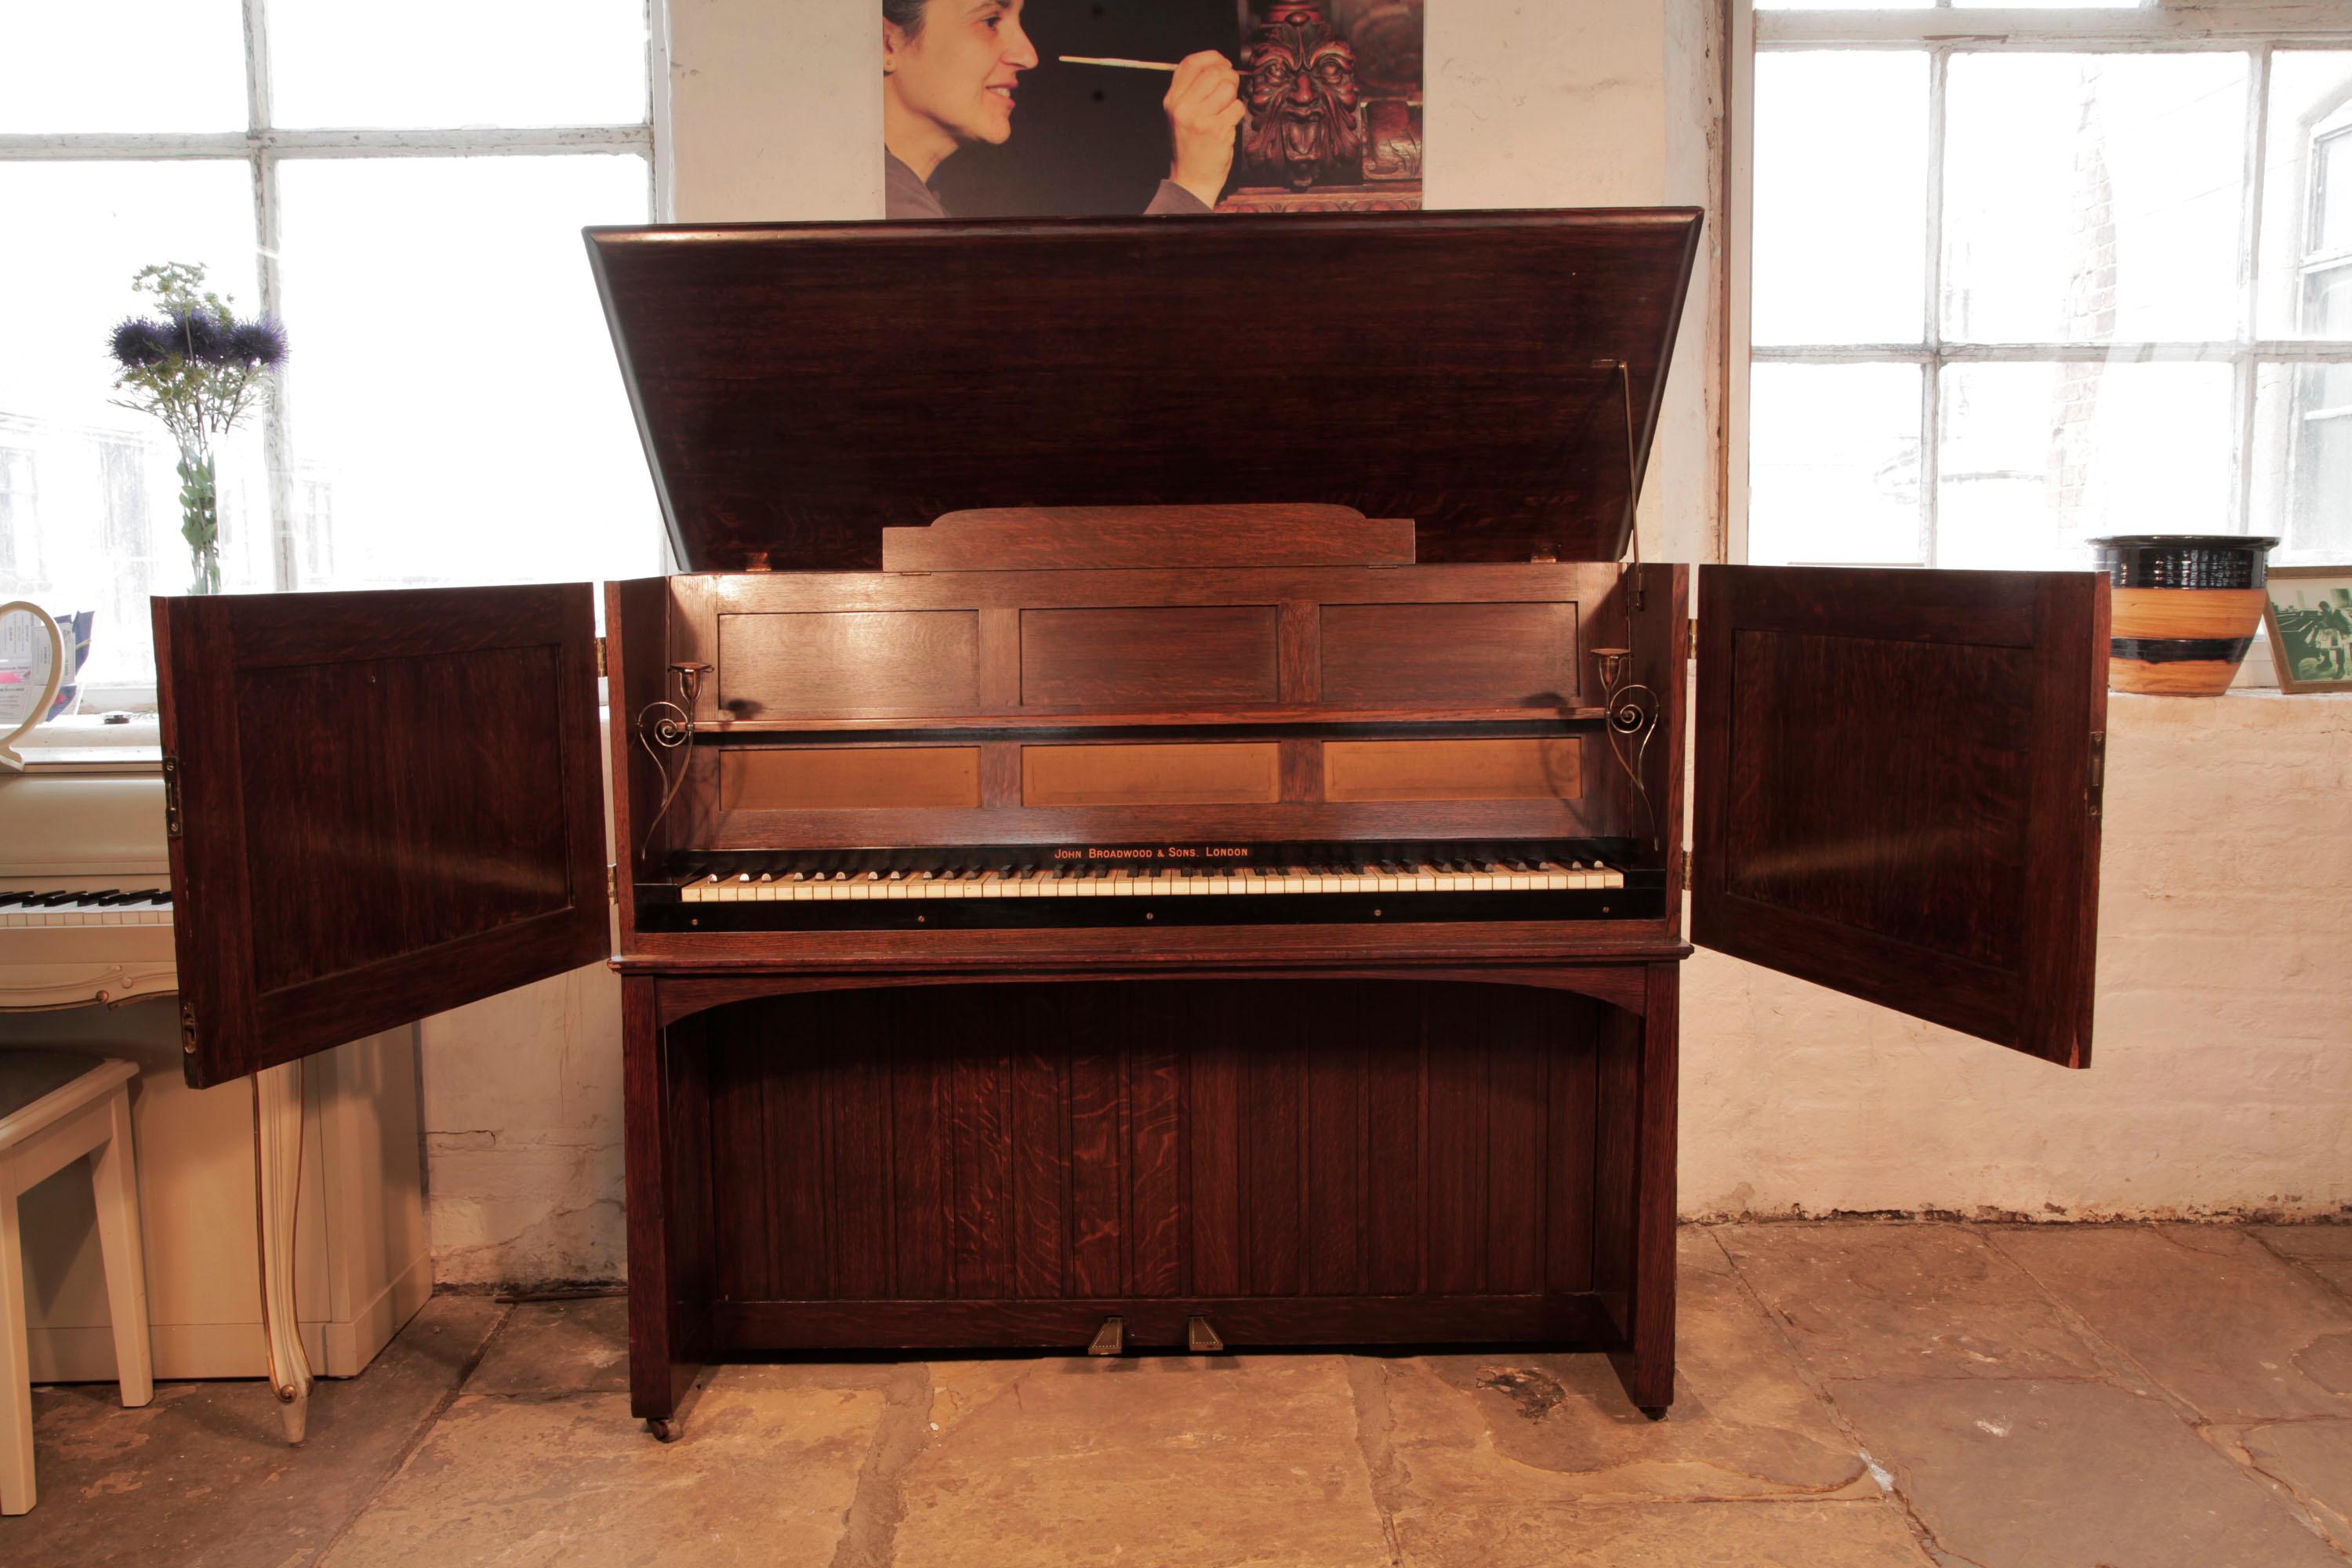 Broadwood 'Manxman' Oak Piano Arts and Crafts Designed by M. H. Baillie Scott For Sale 4